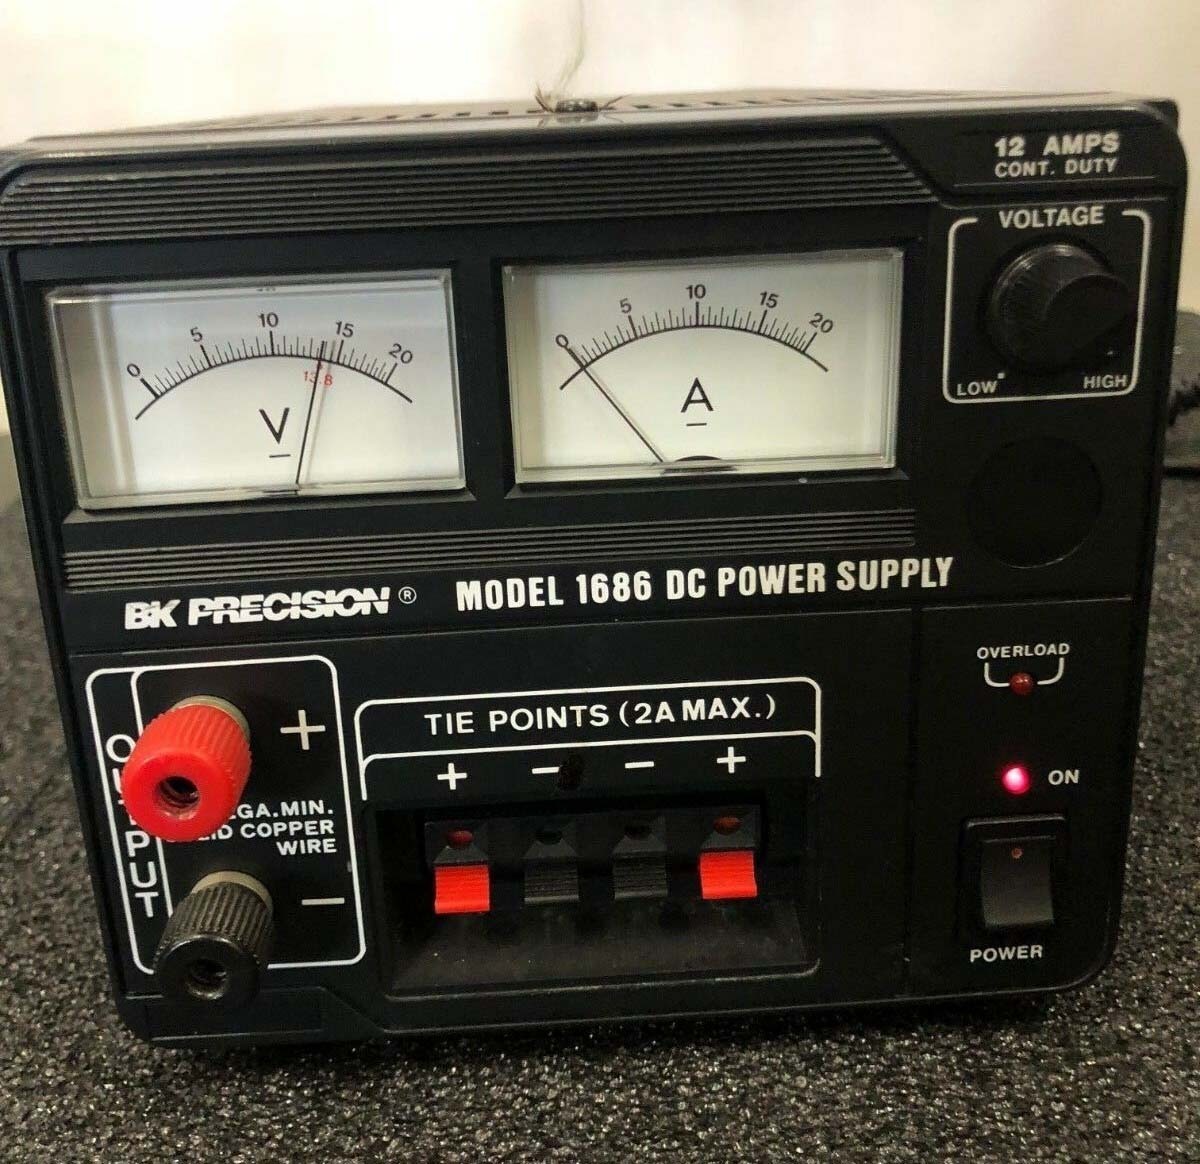 Bk Precision Model 1686 DC Power Supply A05 for sale online 